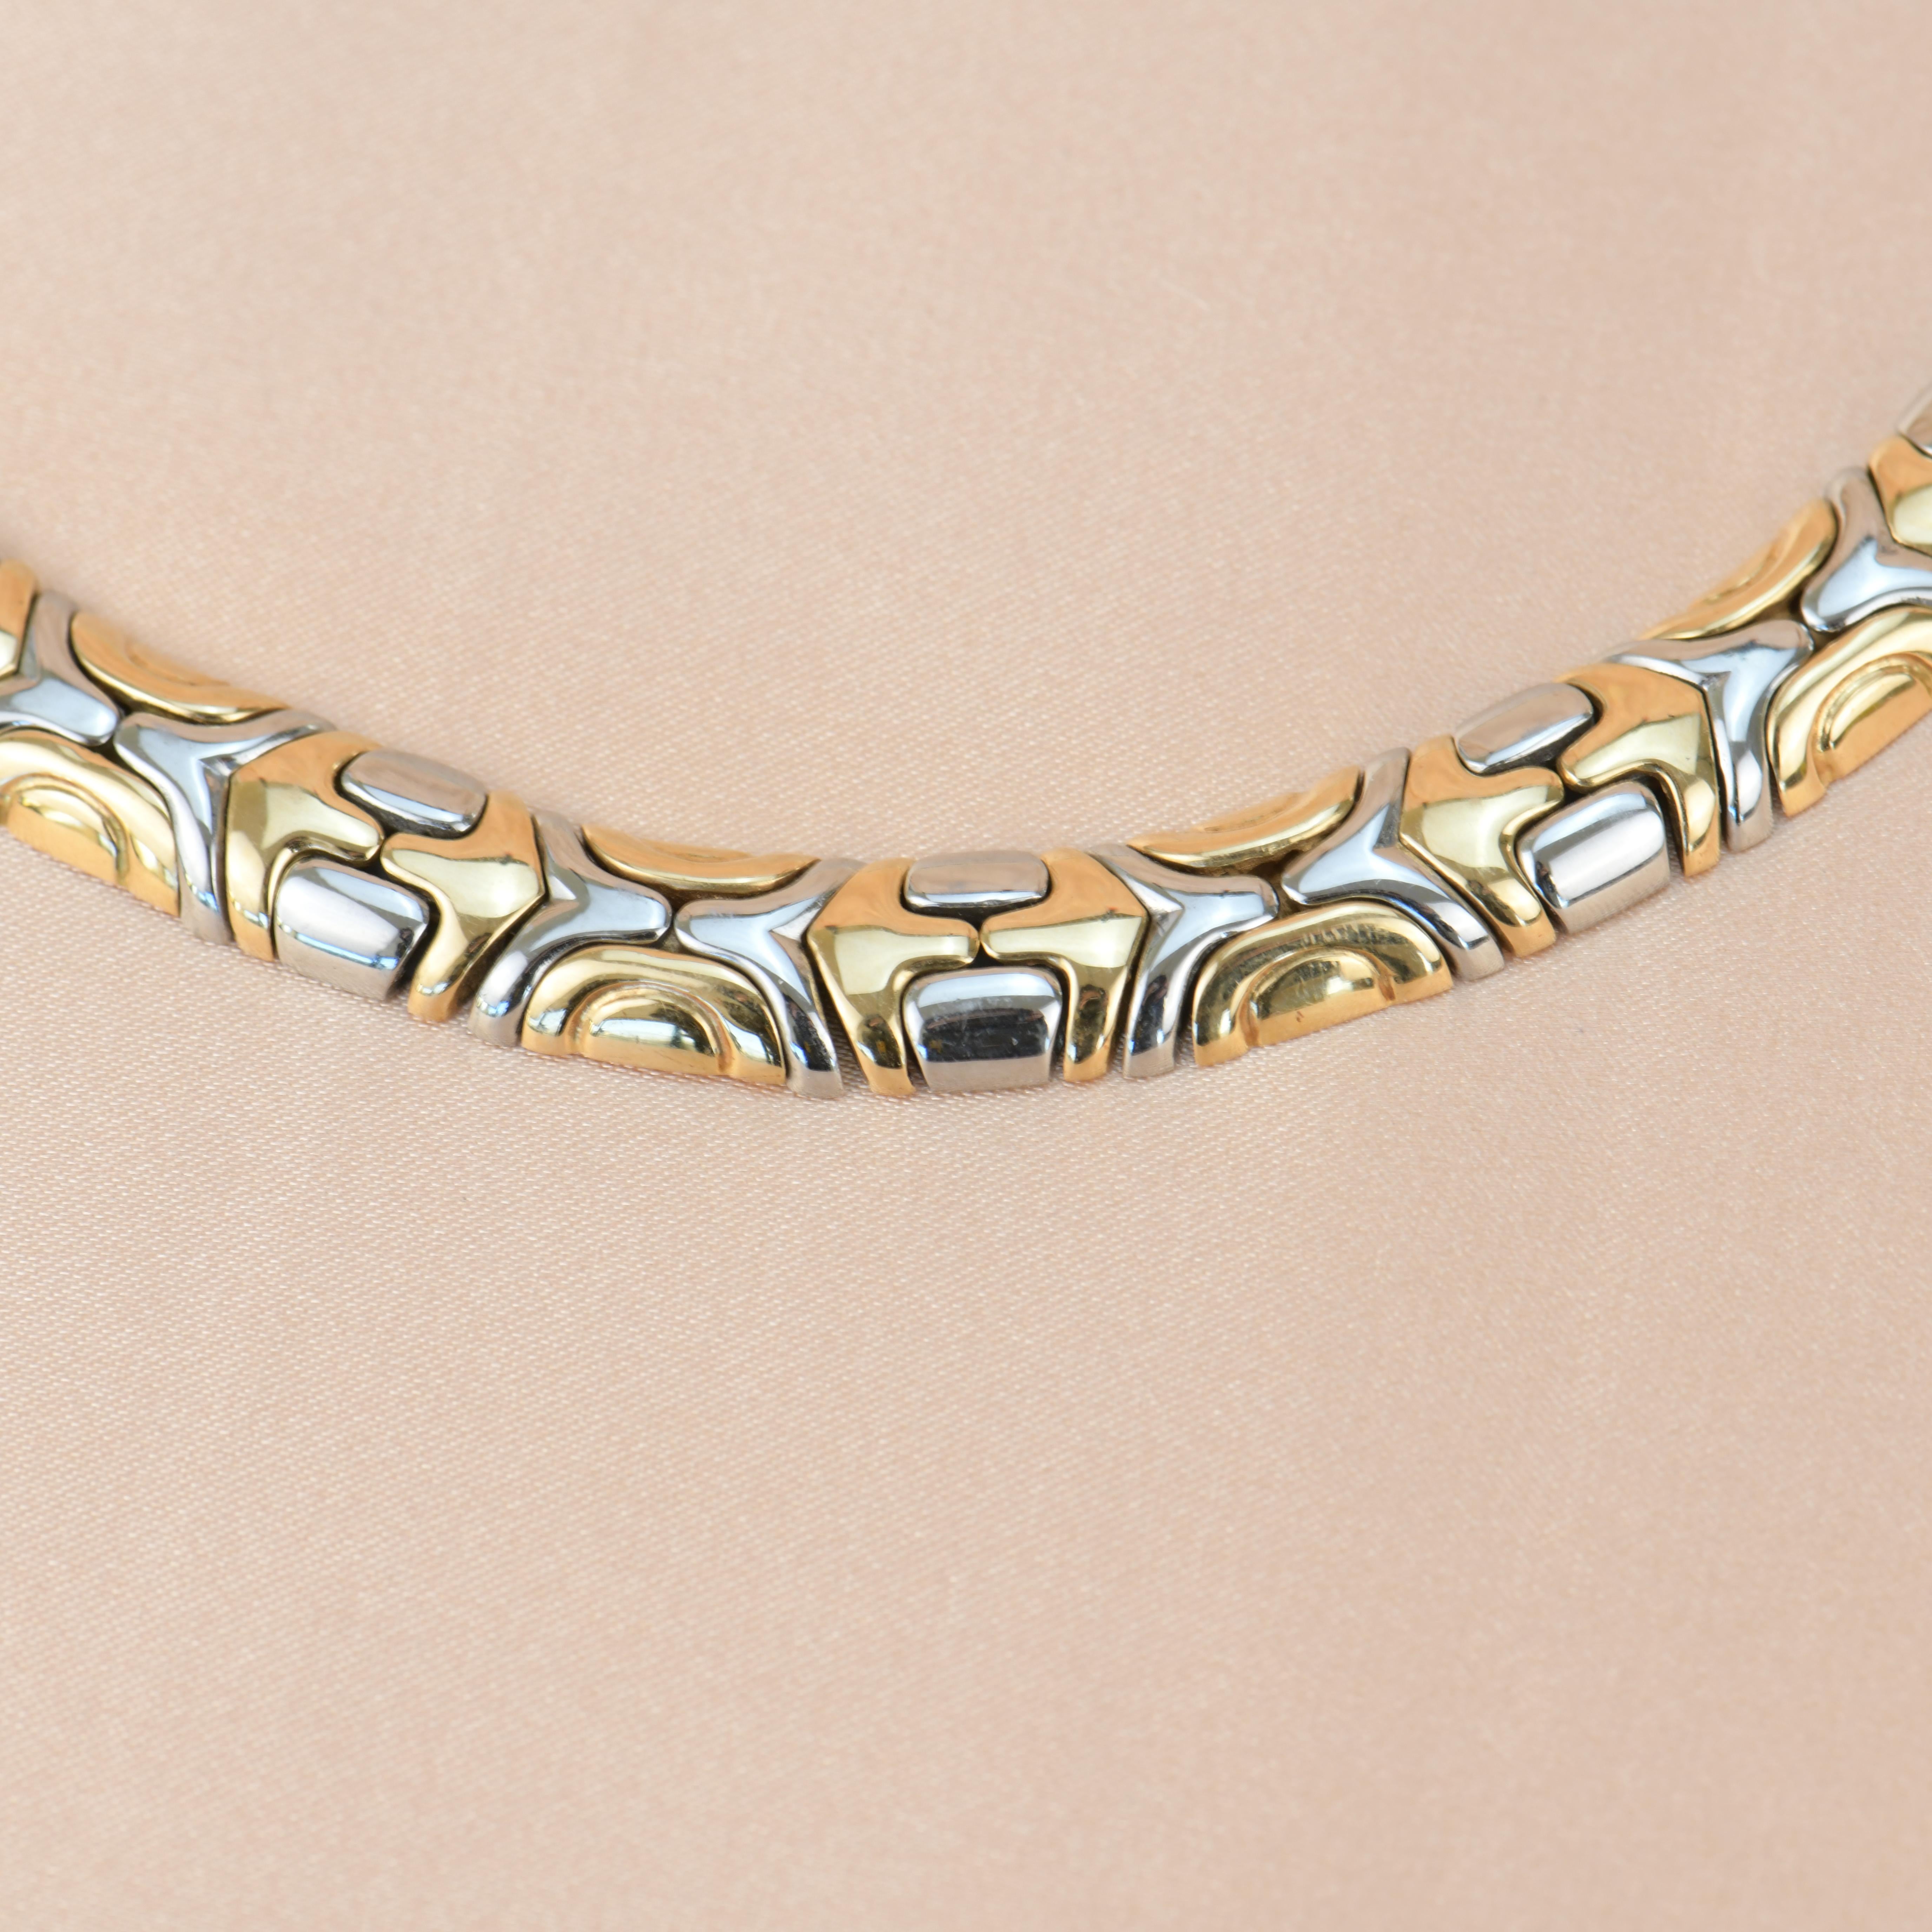 Bvlgari Alveare Gold and Steel Choker Necklace In Excellent Condition For Sale In Banbury, GB